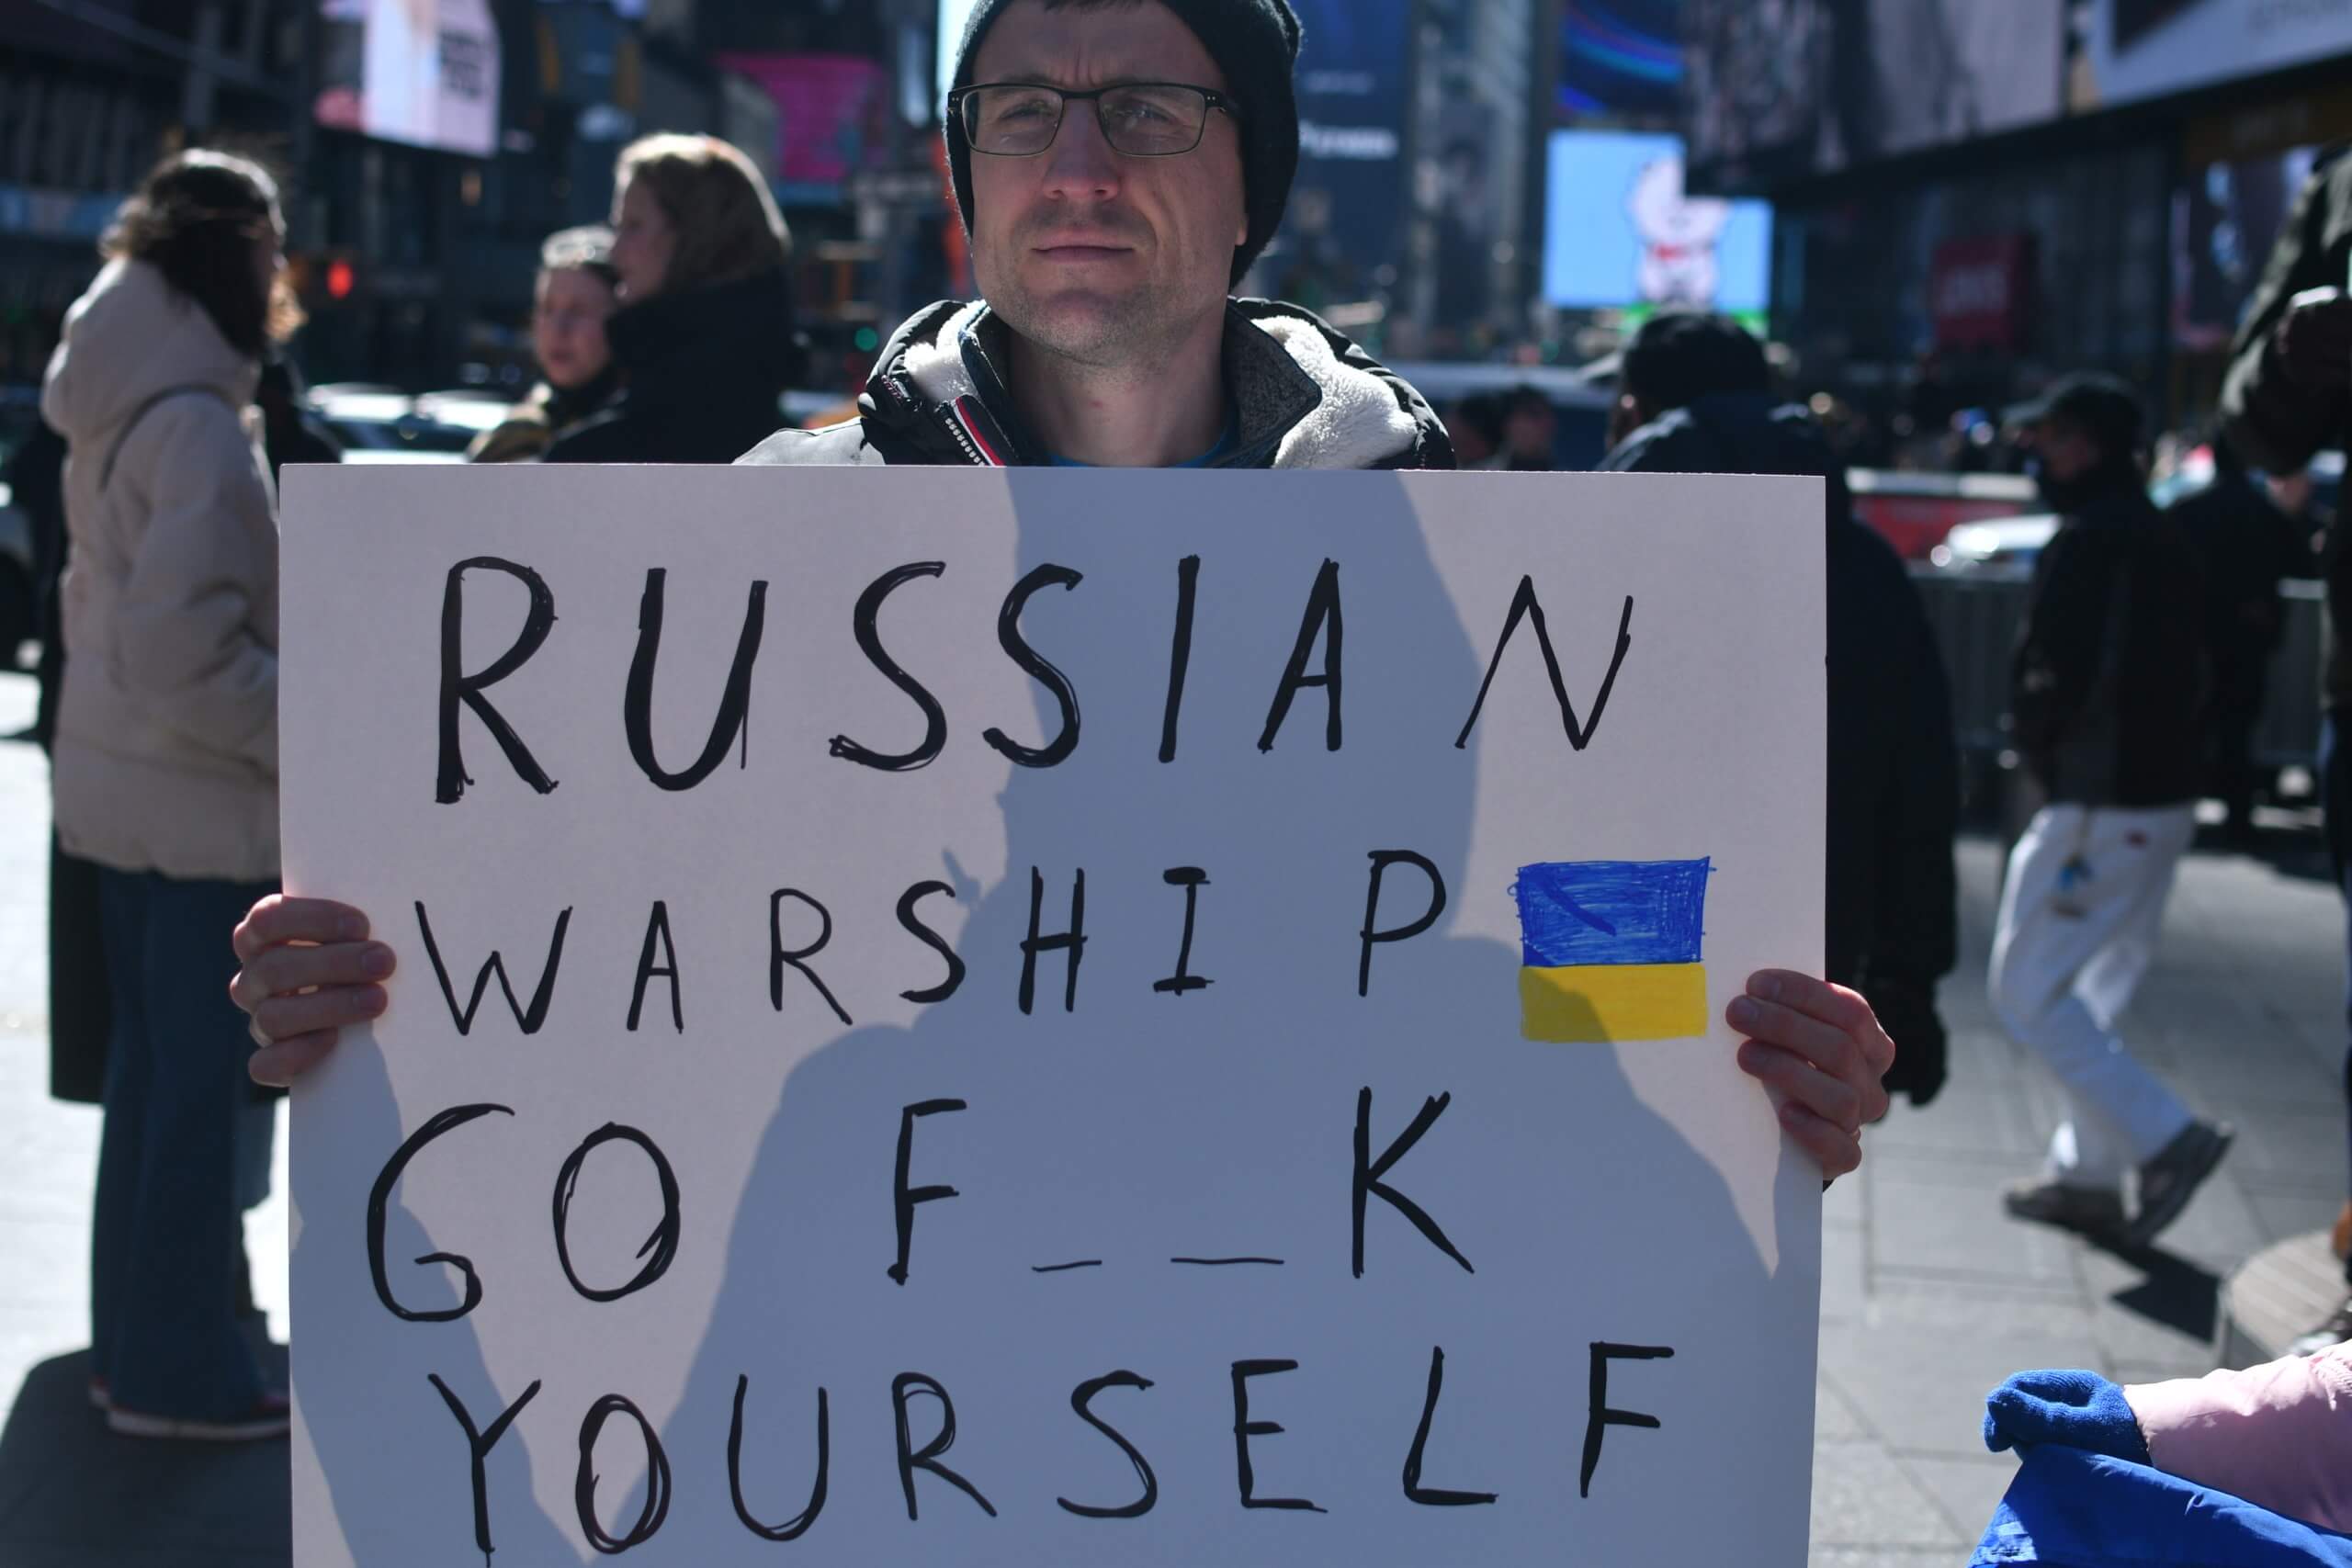 Photo Feb 26 1 29 50 PM scaled SEE IT: New York stands united with Ukraine at latest rally in Times Square